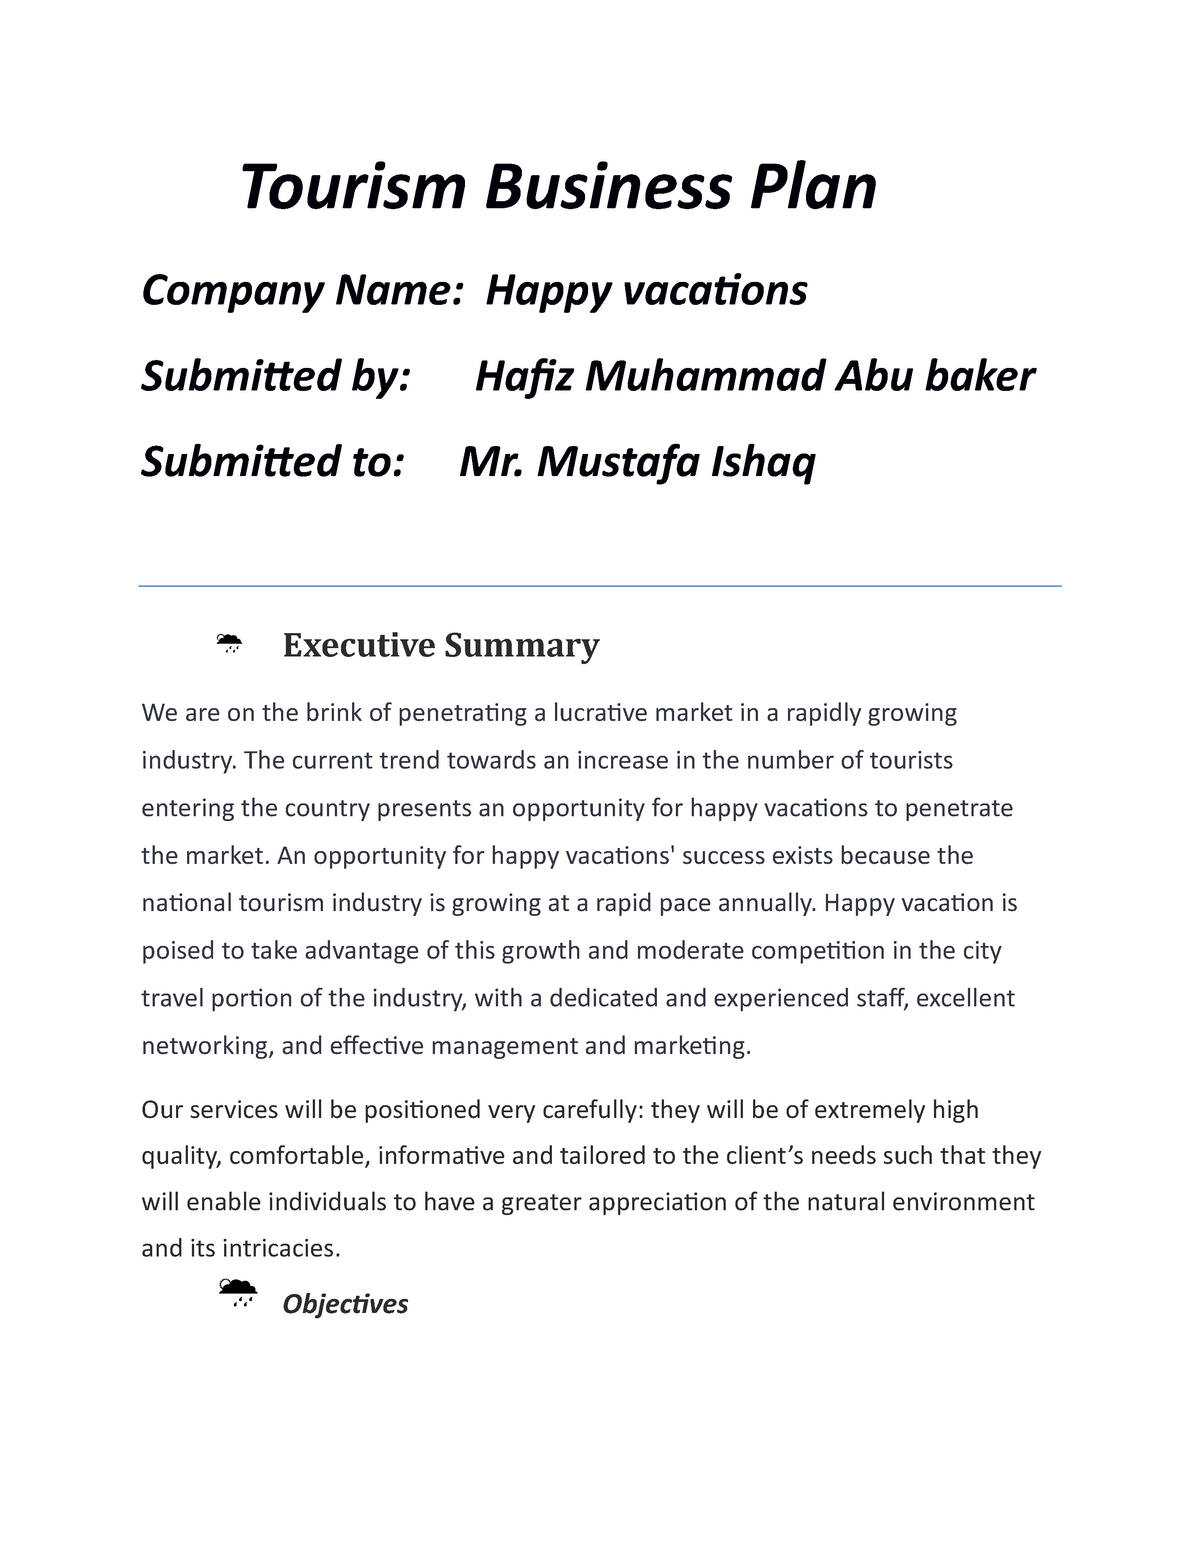 business plan tourism example